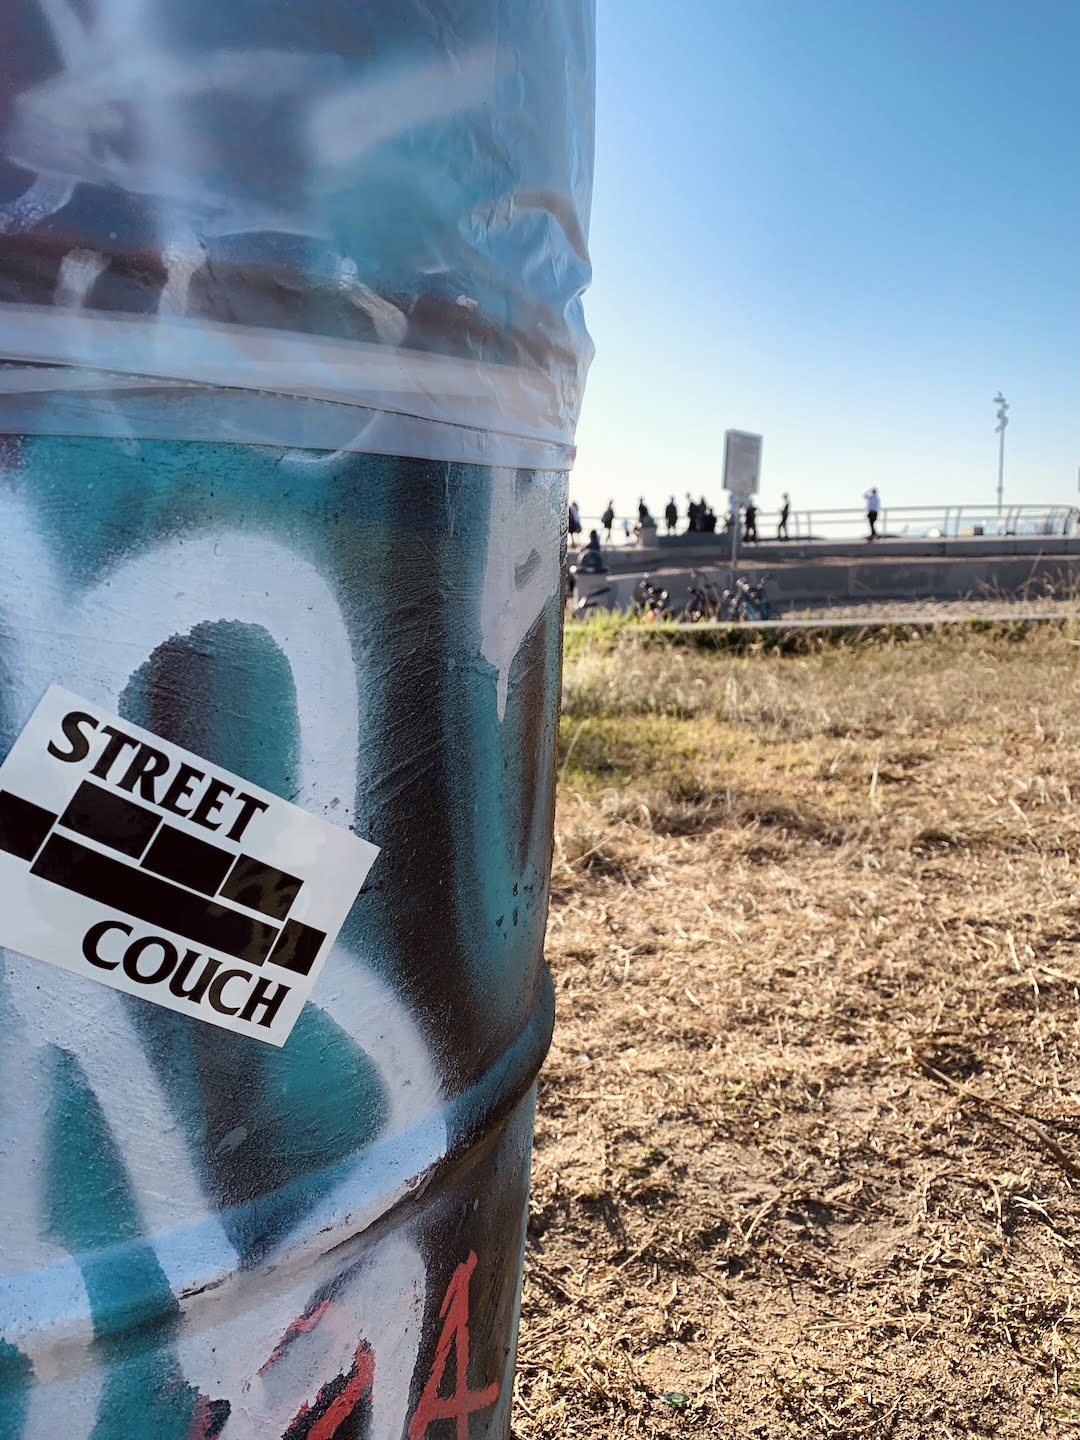 street couch sticker and graffiti on trash can at venice skate park